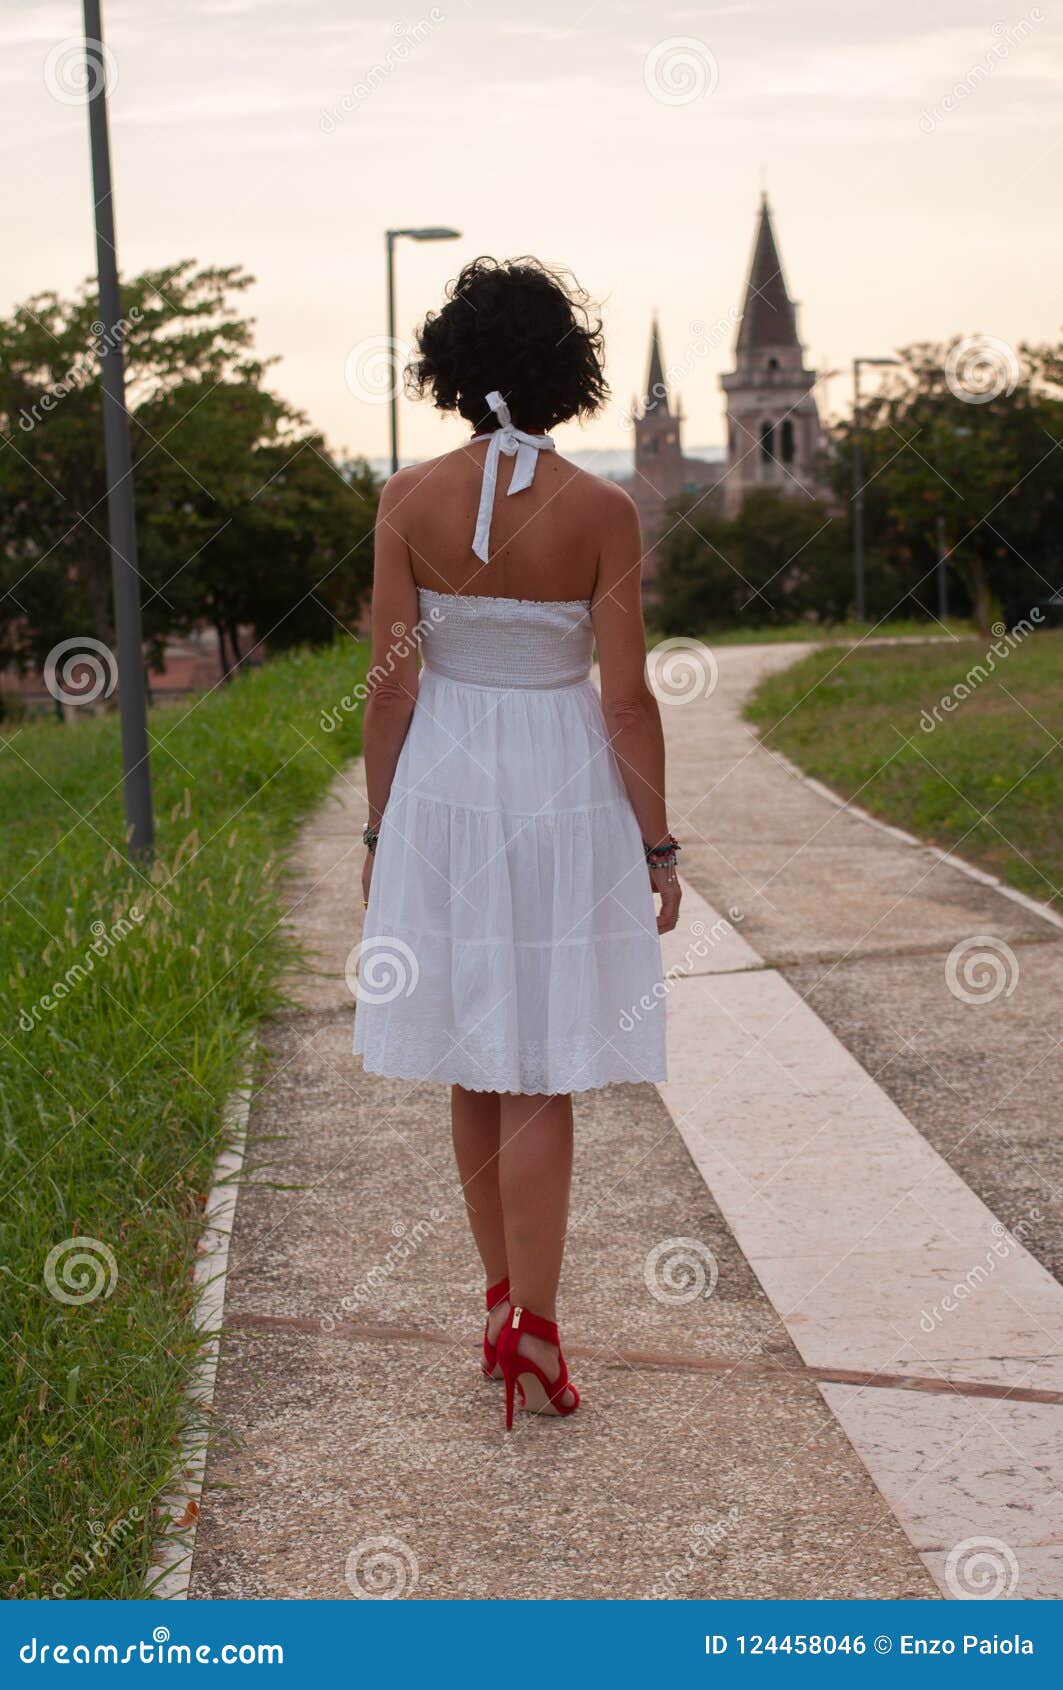 Lady with Short White Dress and Red Shoes with Heels Stock Photo